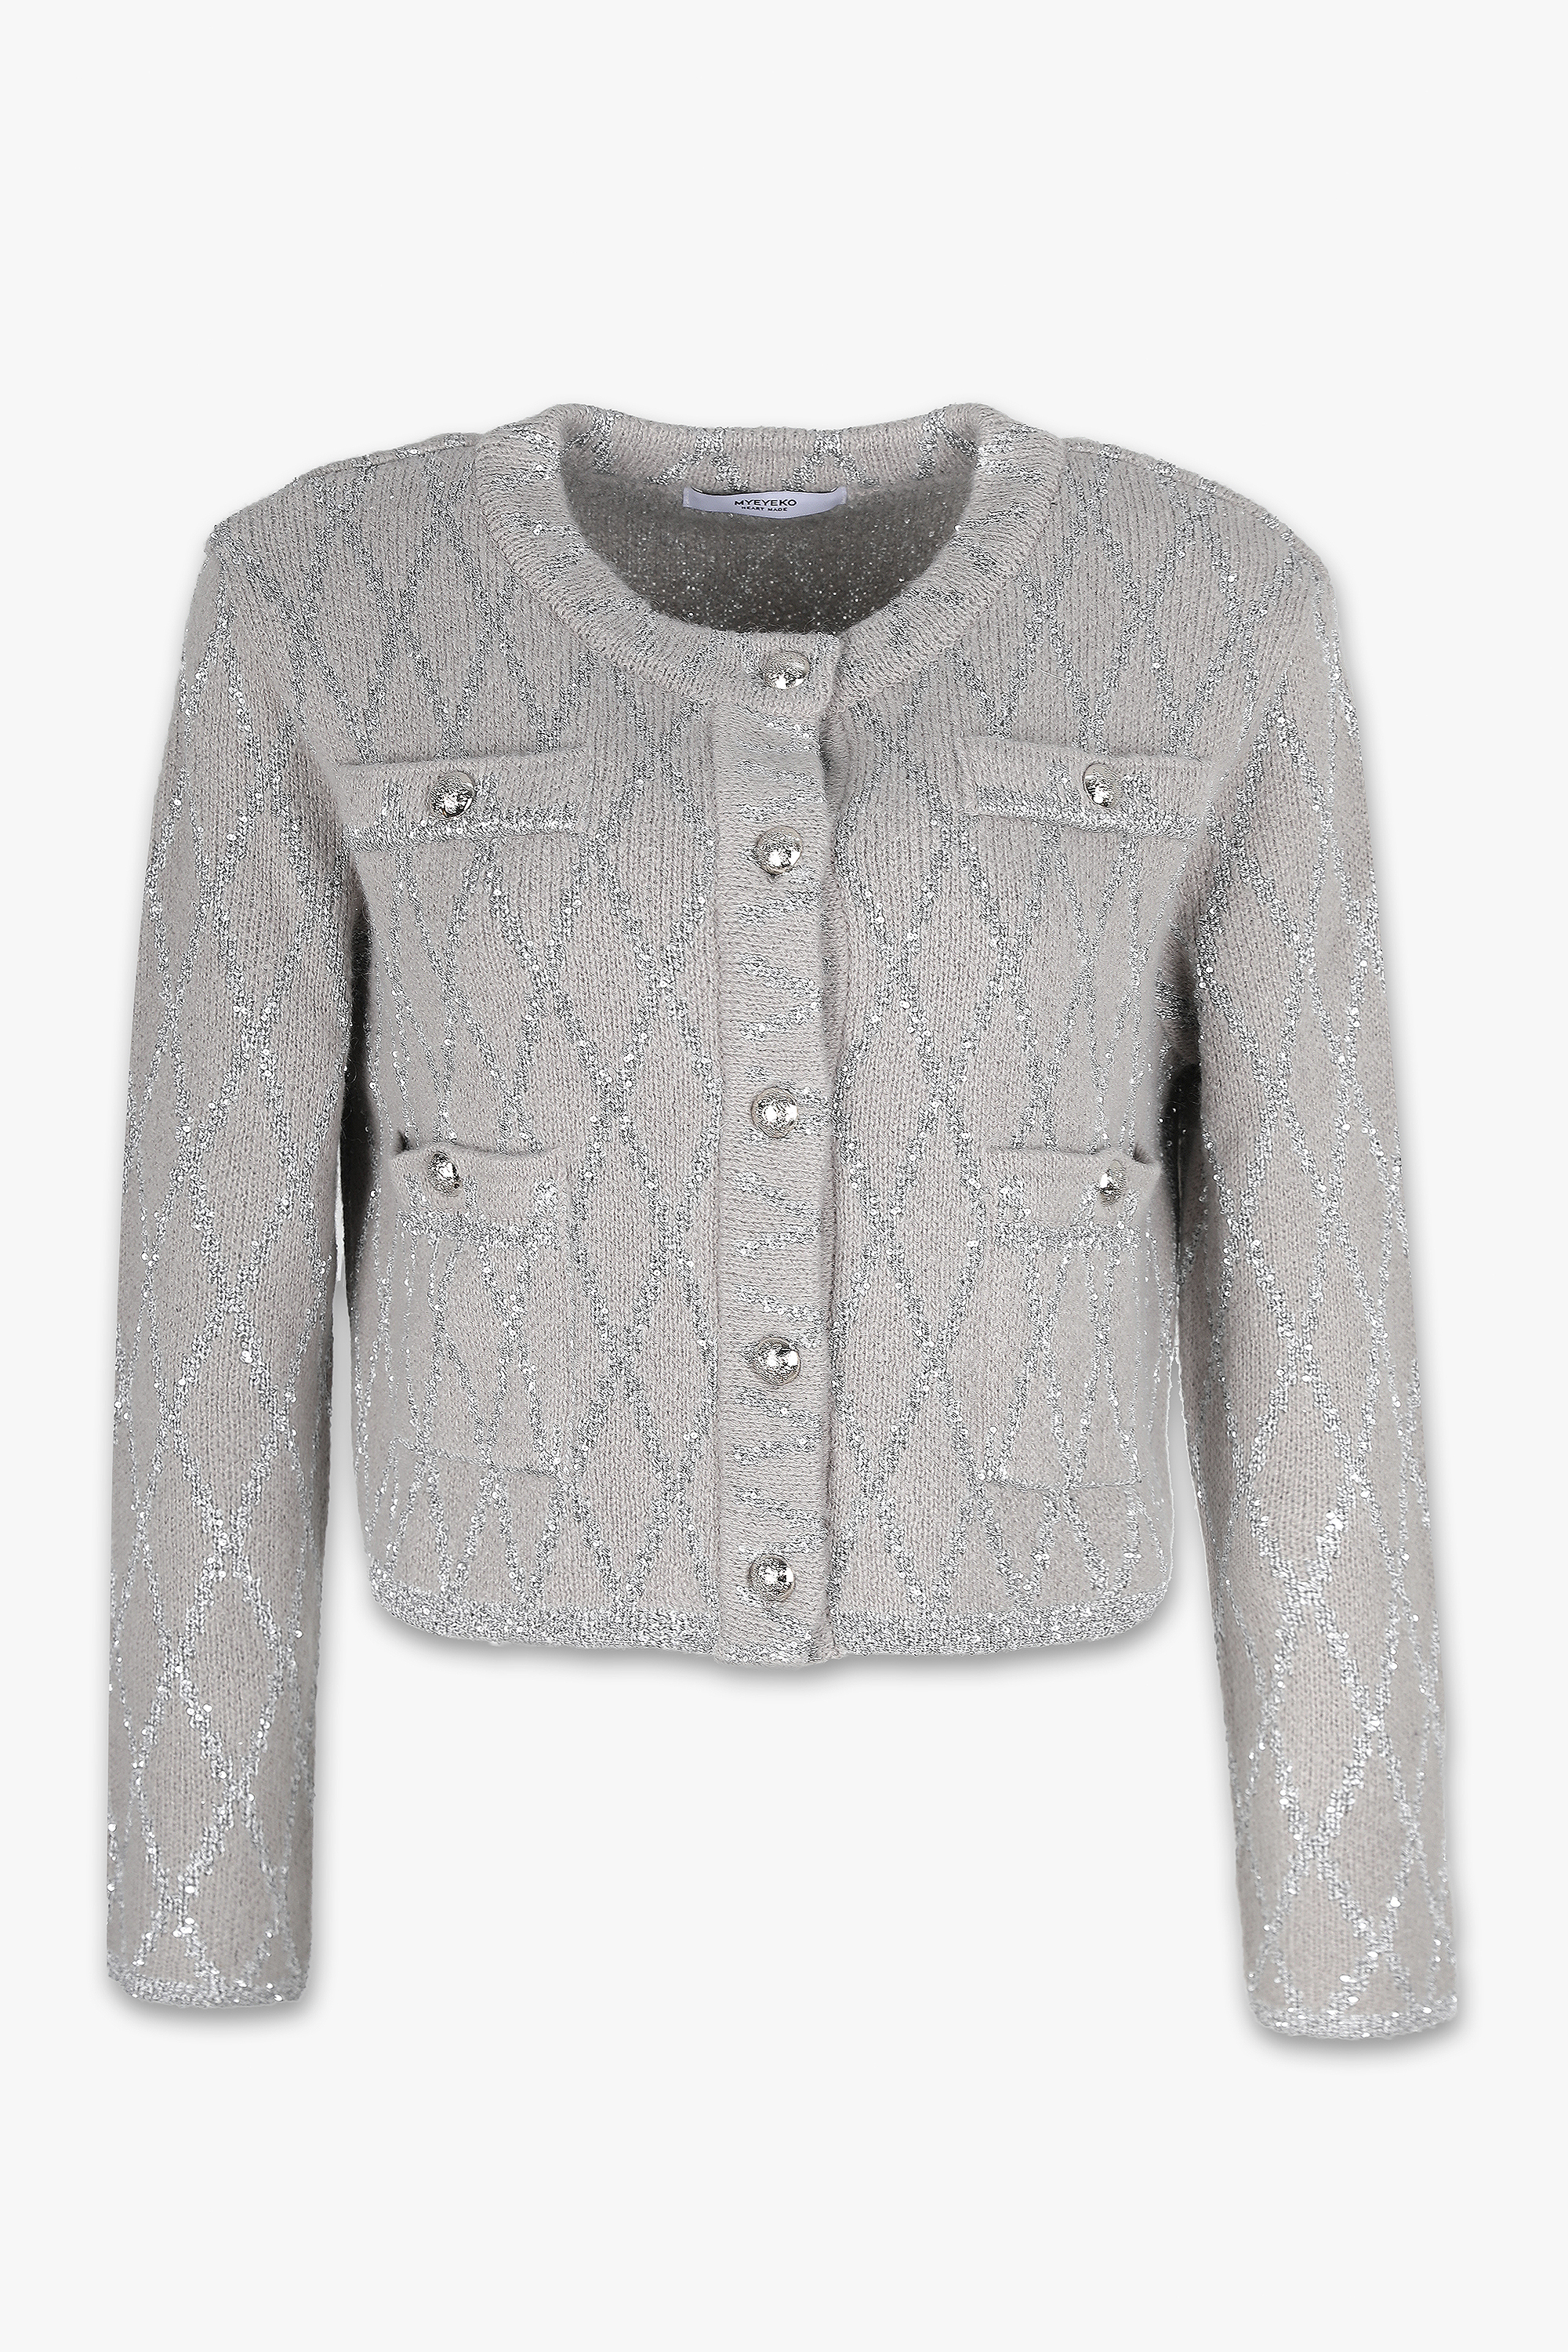 HIGH QUALITY LINE - SEQUIN DIA KNIT JACKET (GRAY)